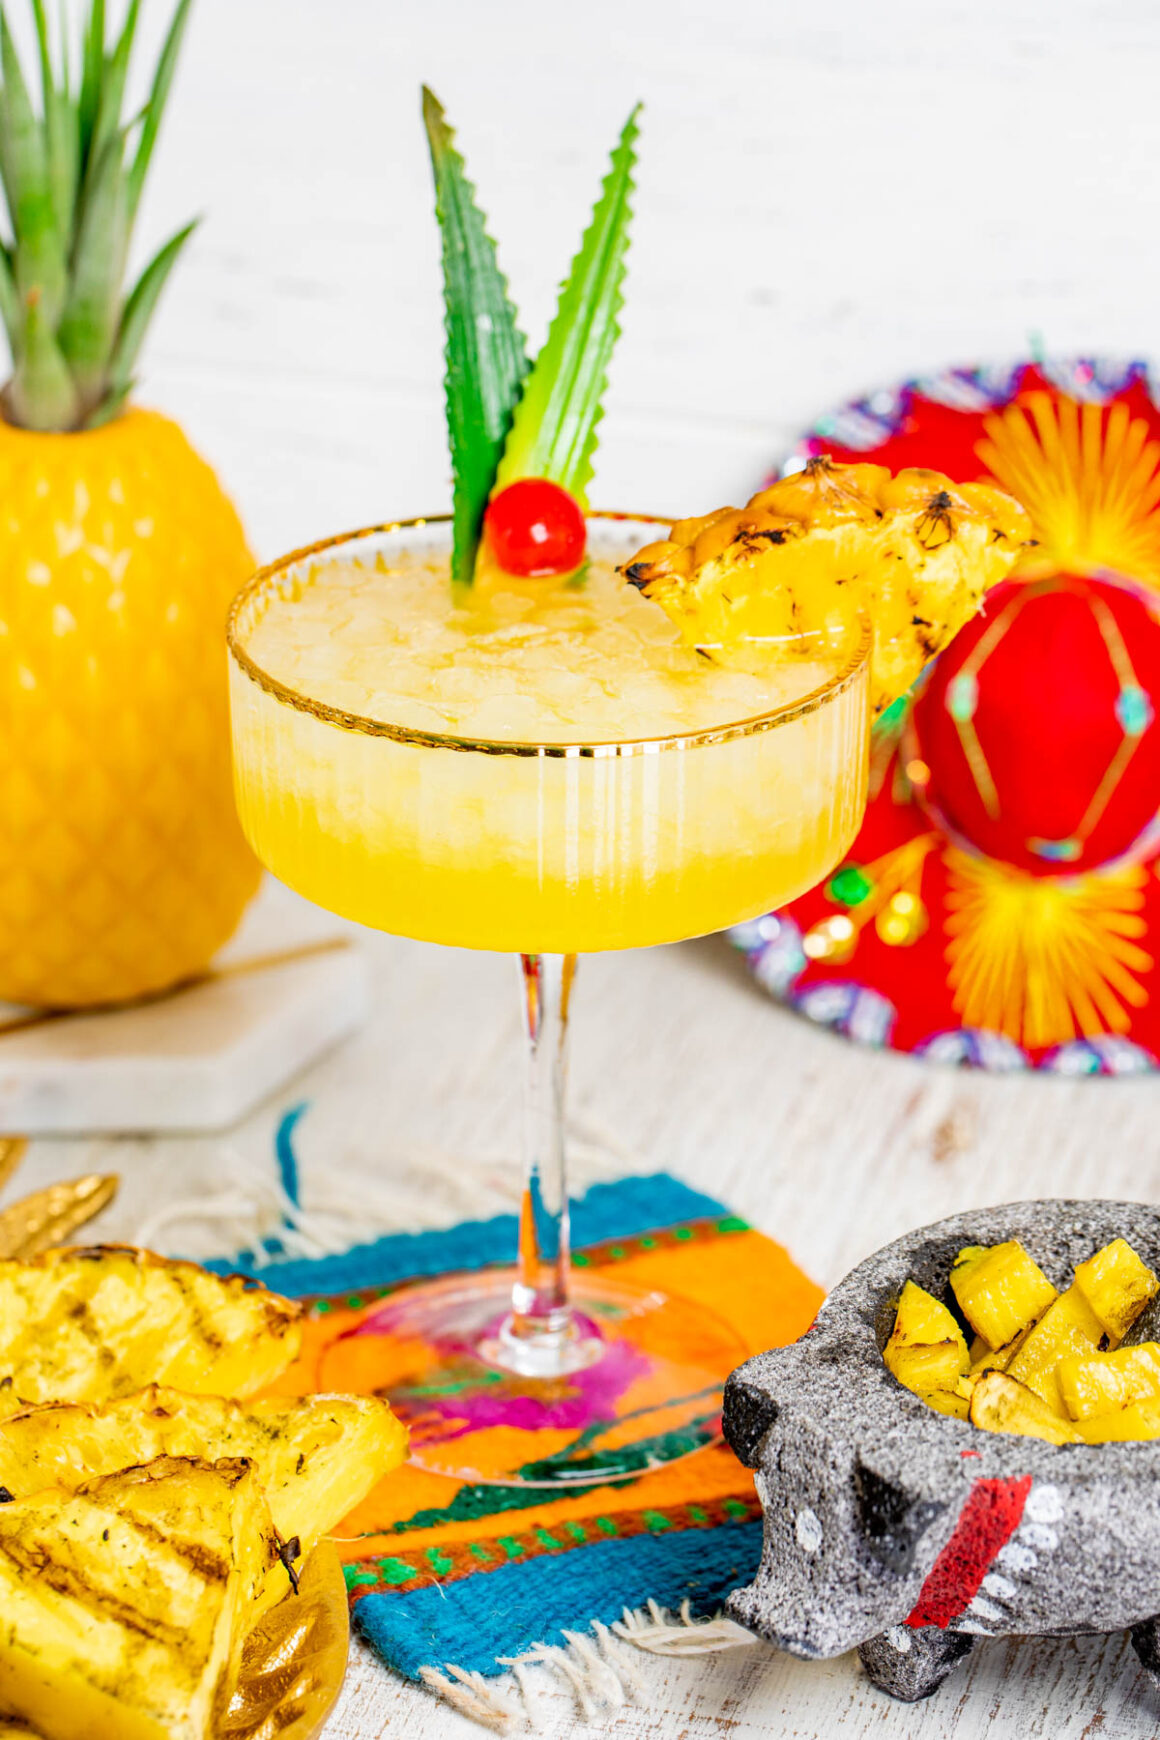 For this grilling season, you must prepare this amazing Grilled Pineapple Margarita Recipe that will make a good pairing with most BBQ dishes